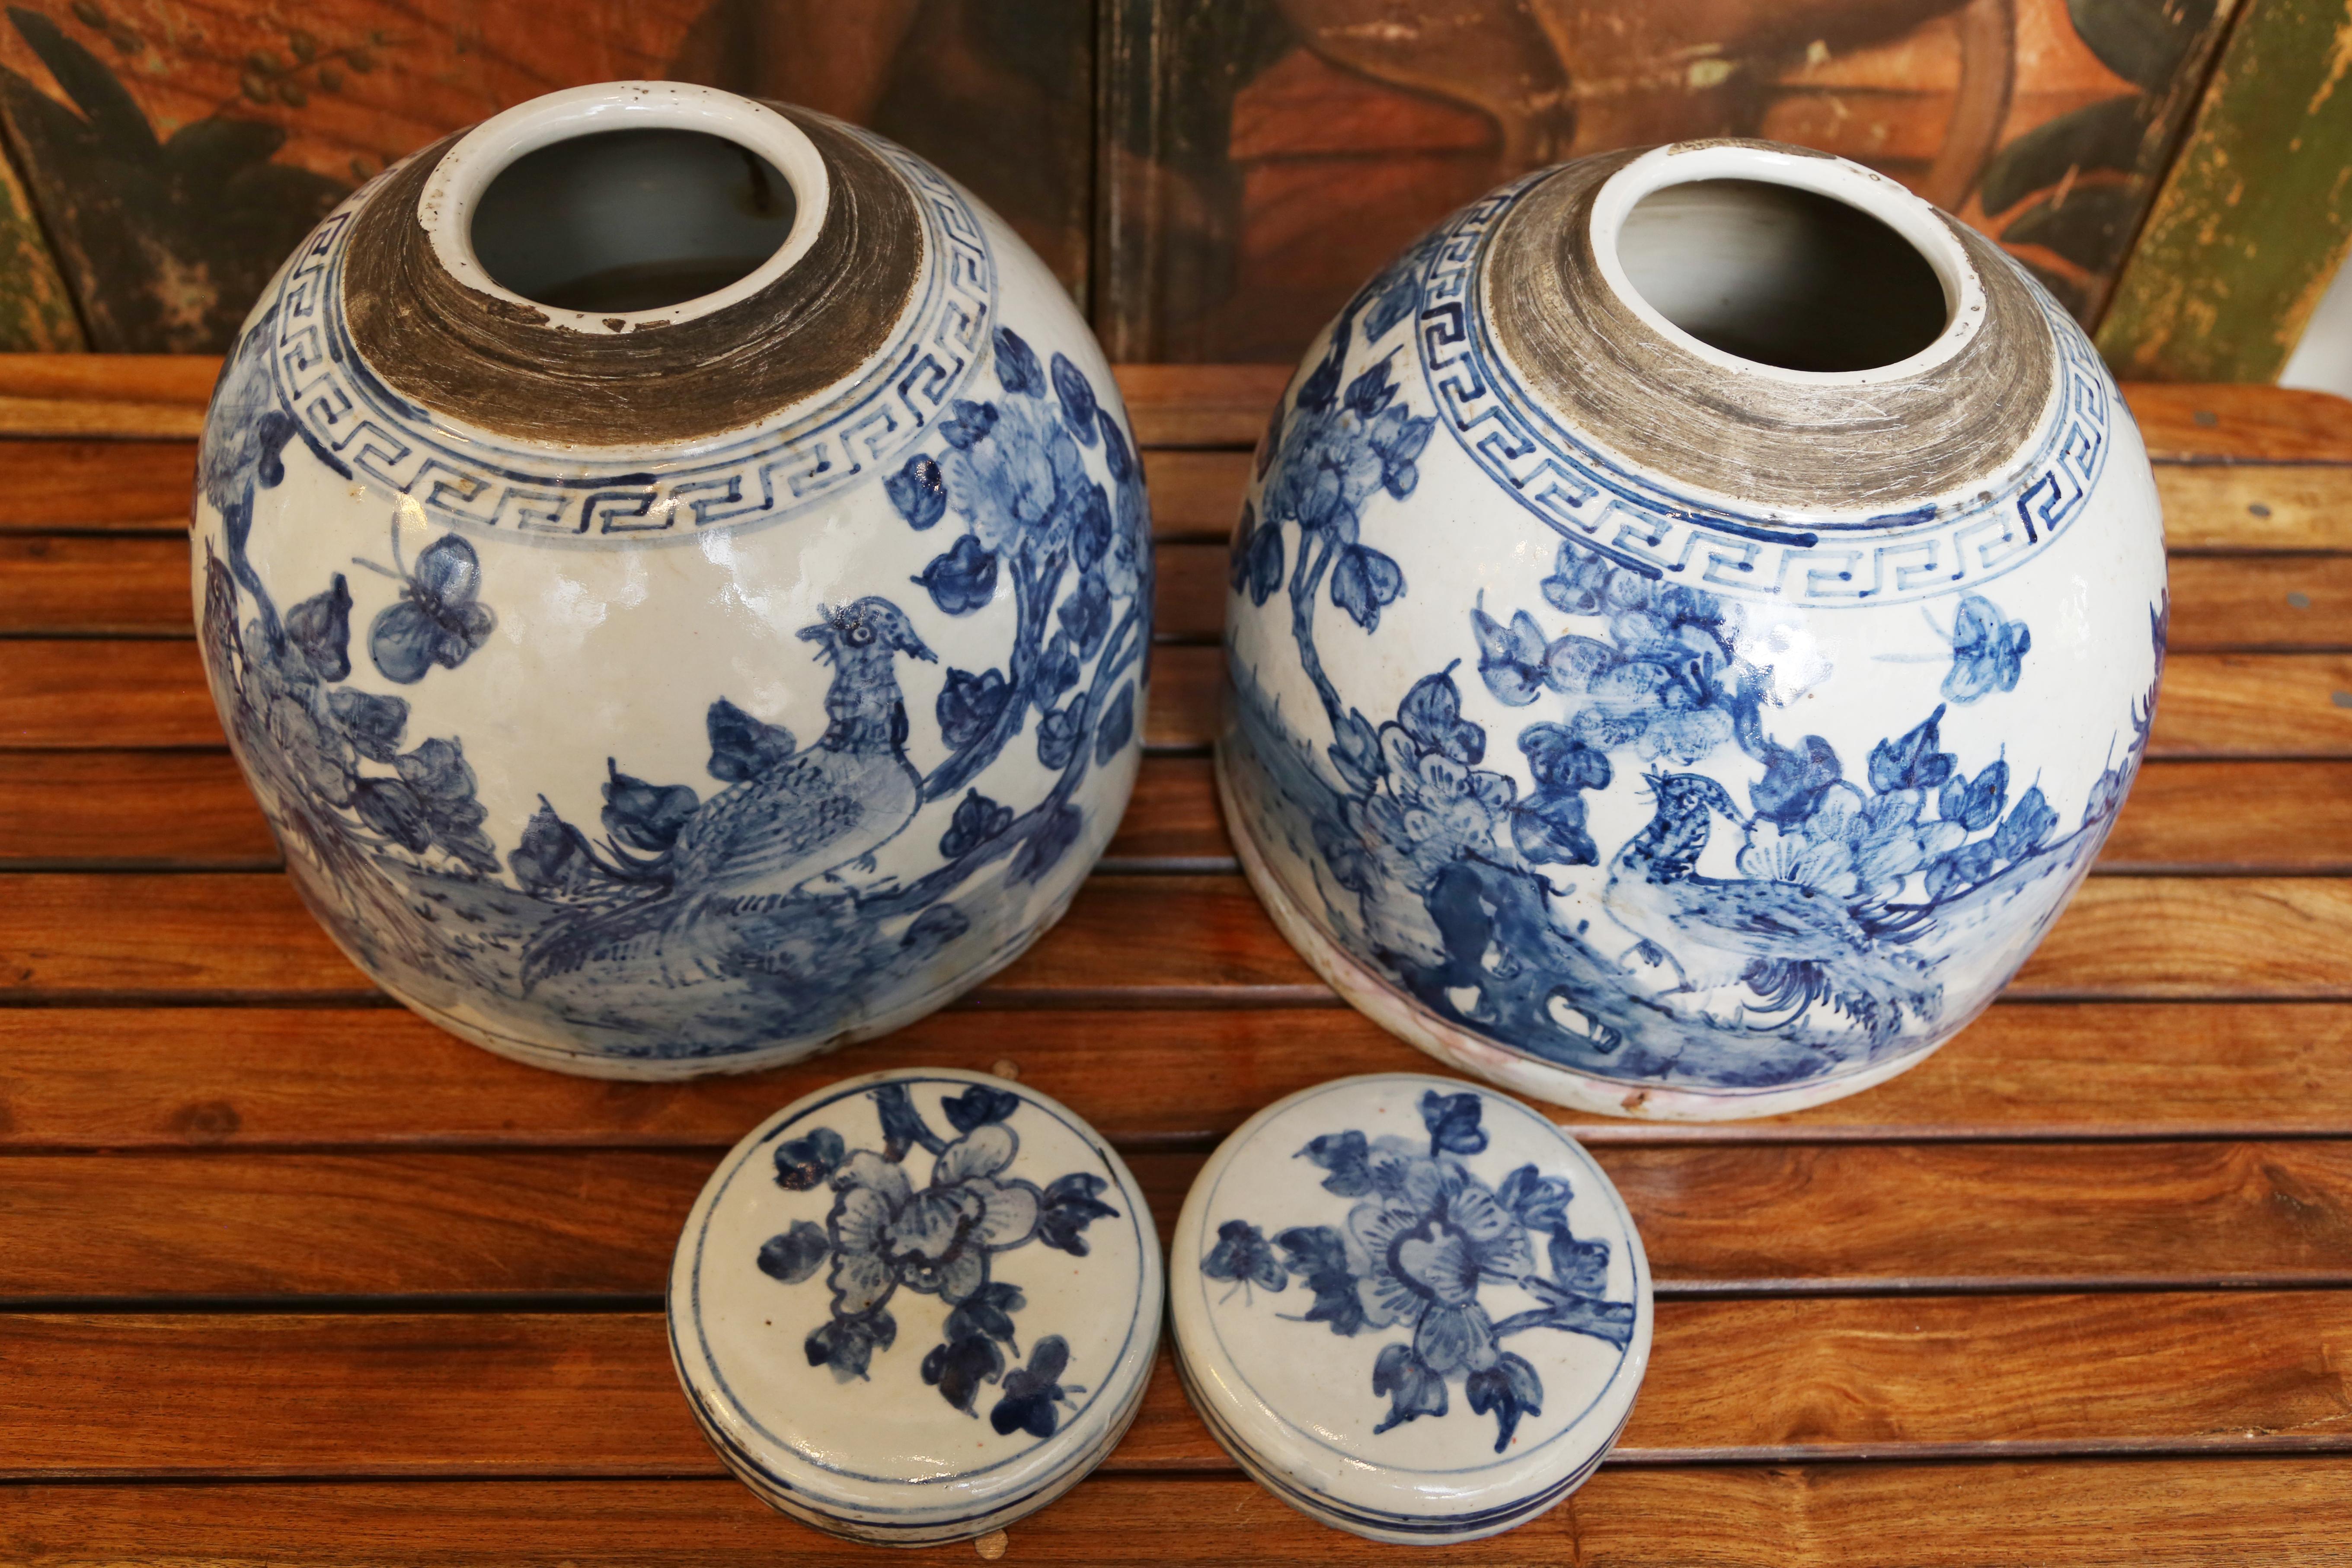 Unusually shaped Chinese blue and white ginger jars with lids.